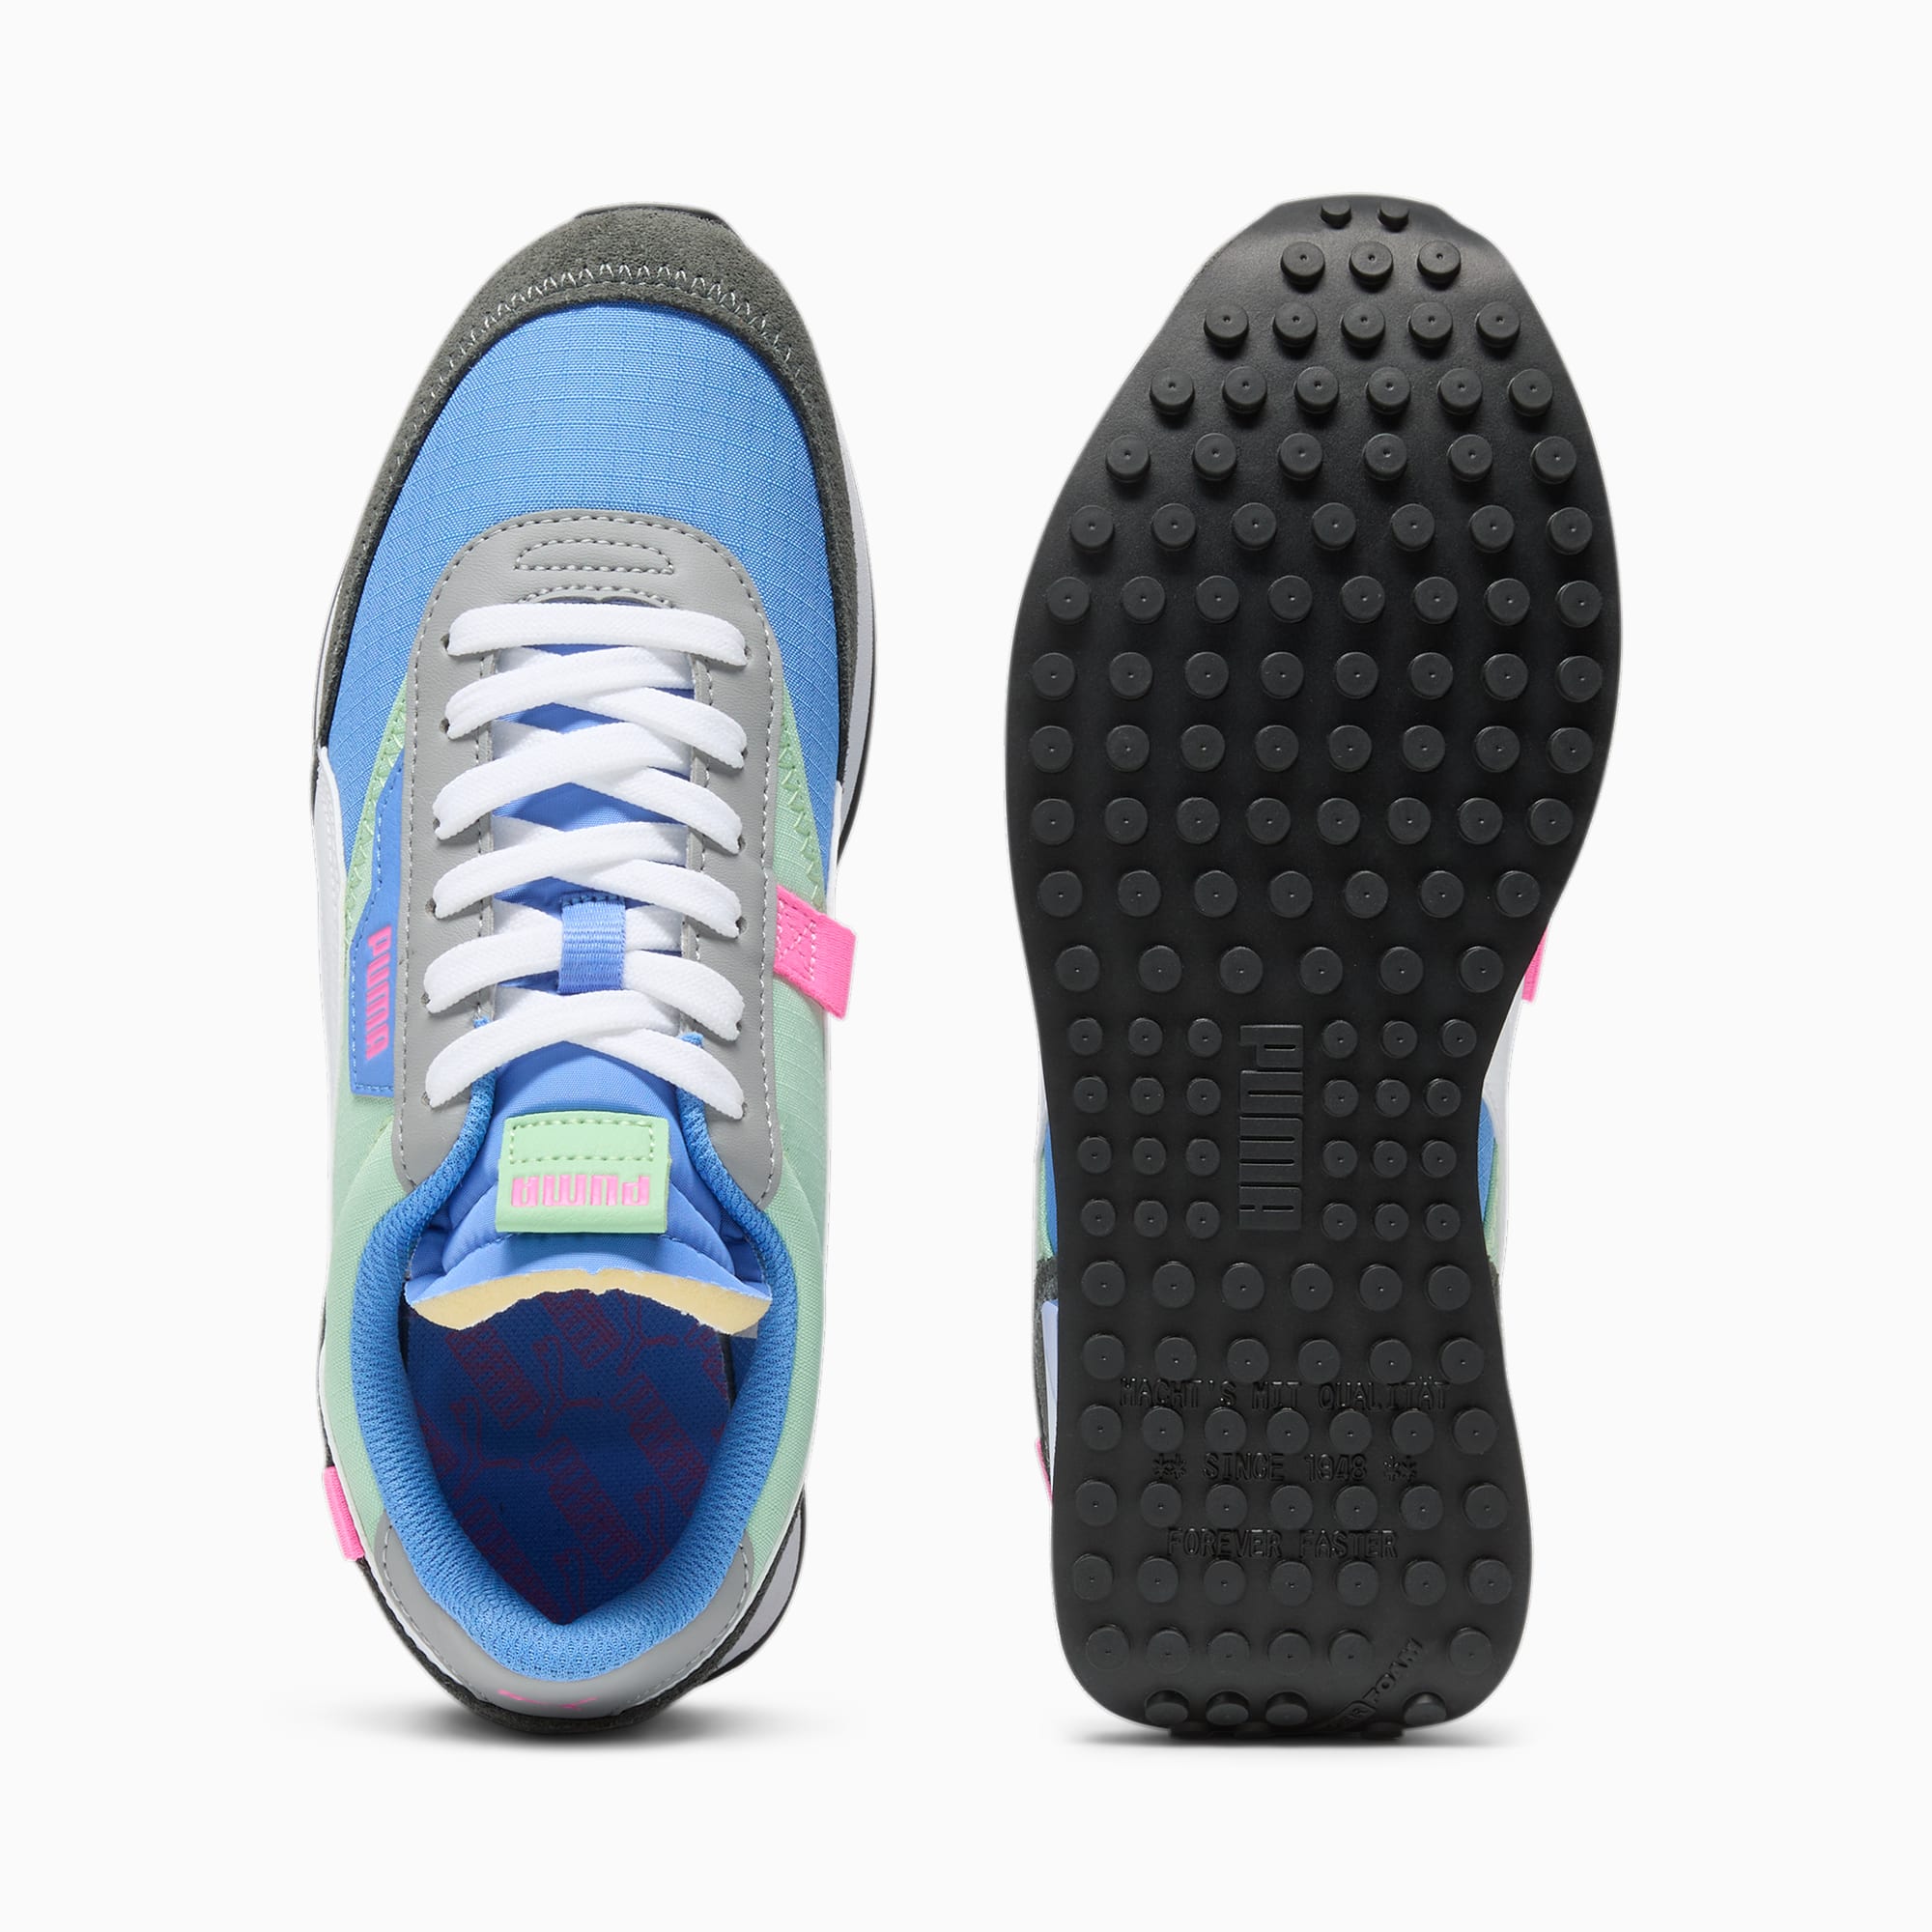 Future Rider Play On Women's Sneakers